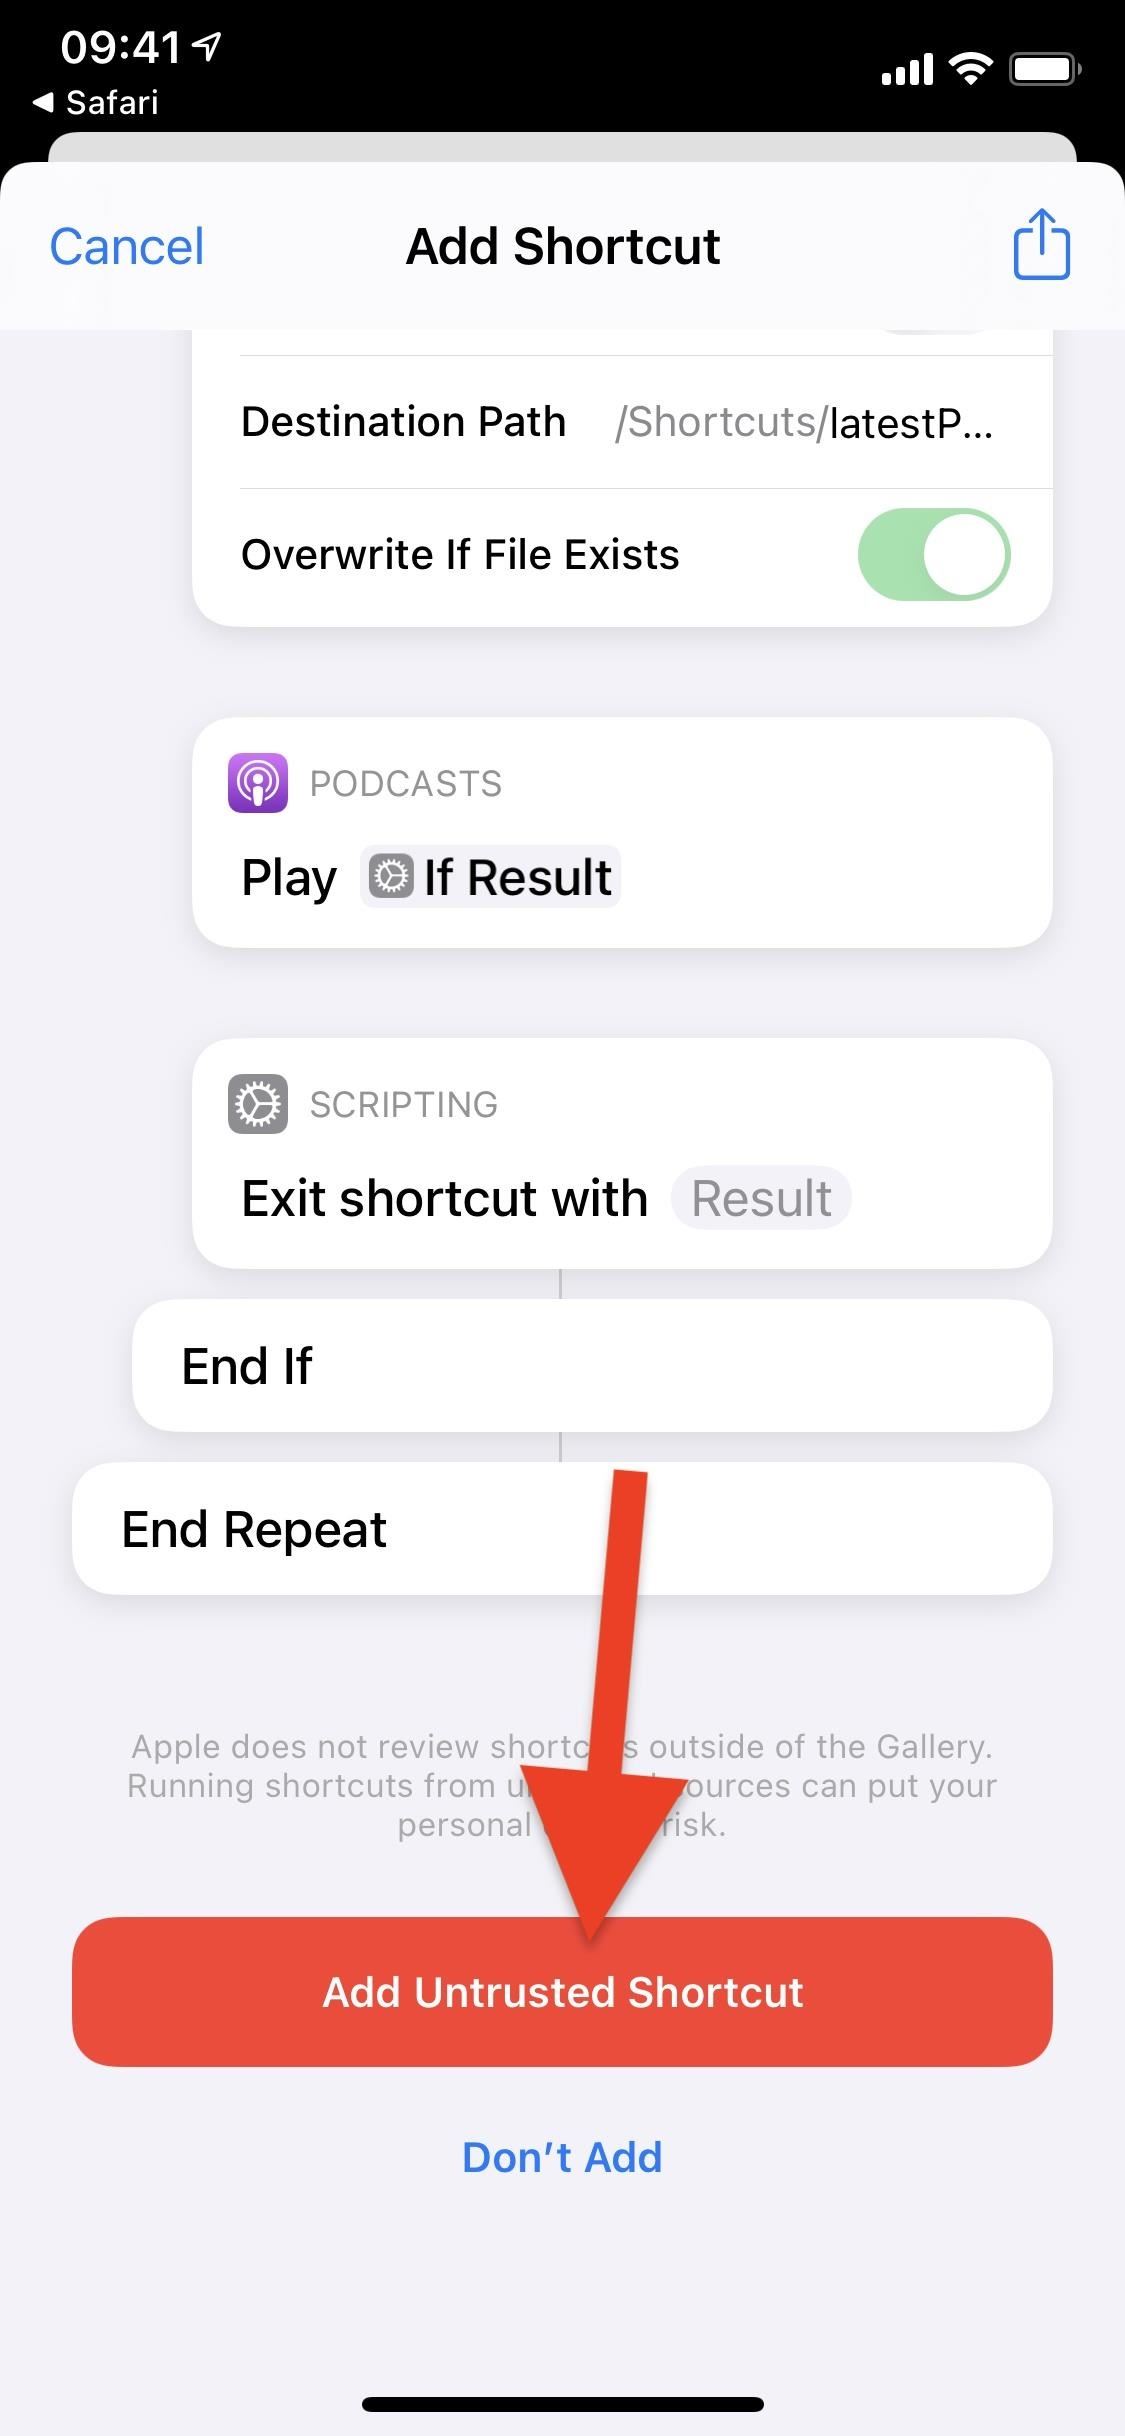 Auto-Play New Podcast Episodes on Your iPhone When Connecting Headphones, Starting a Trip, Tapping an NFC Tag & More